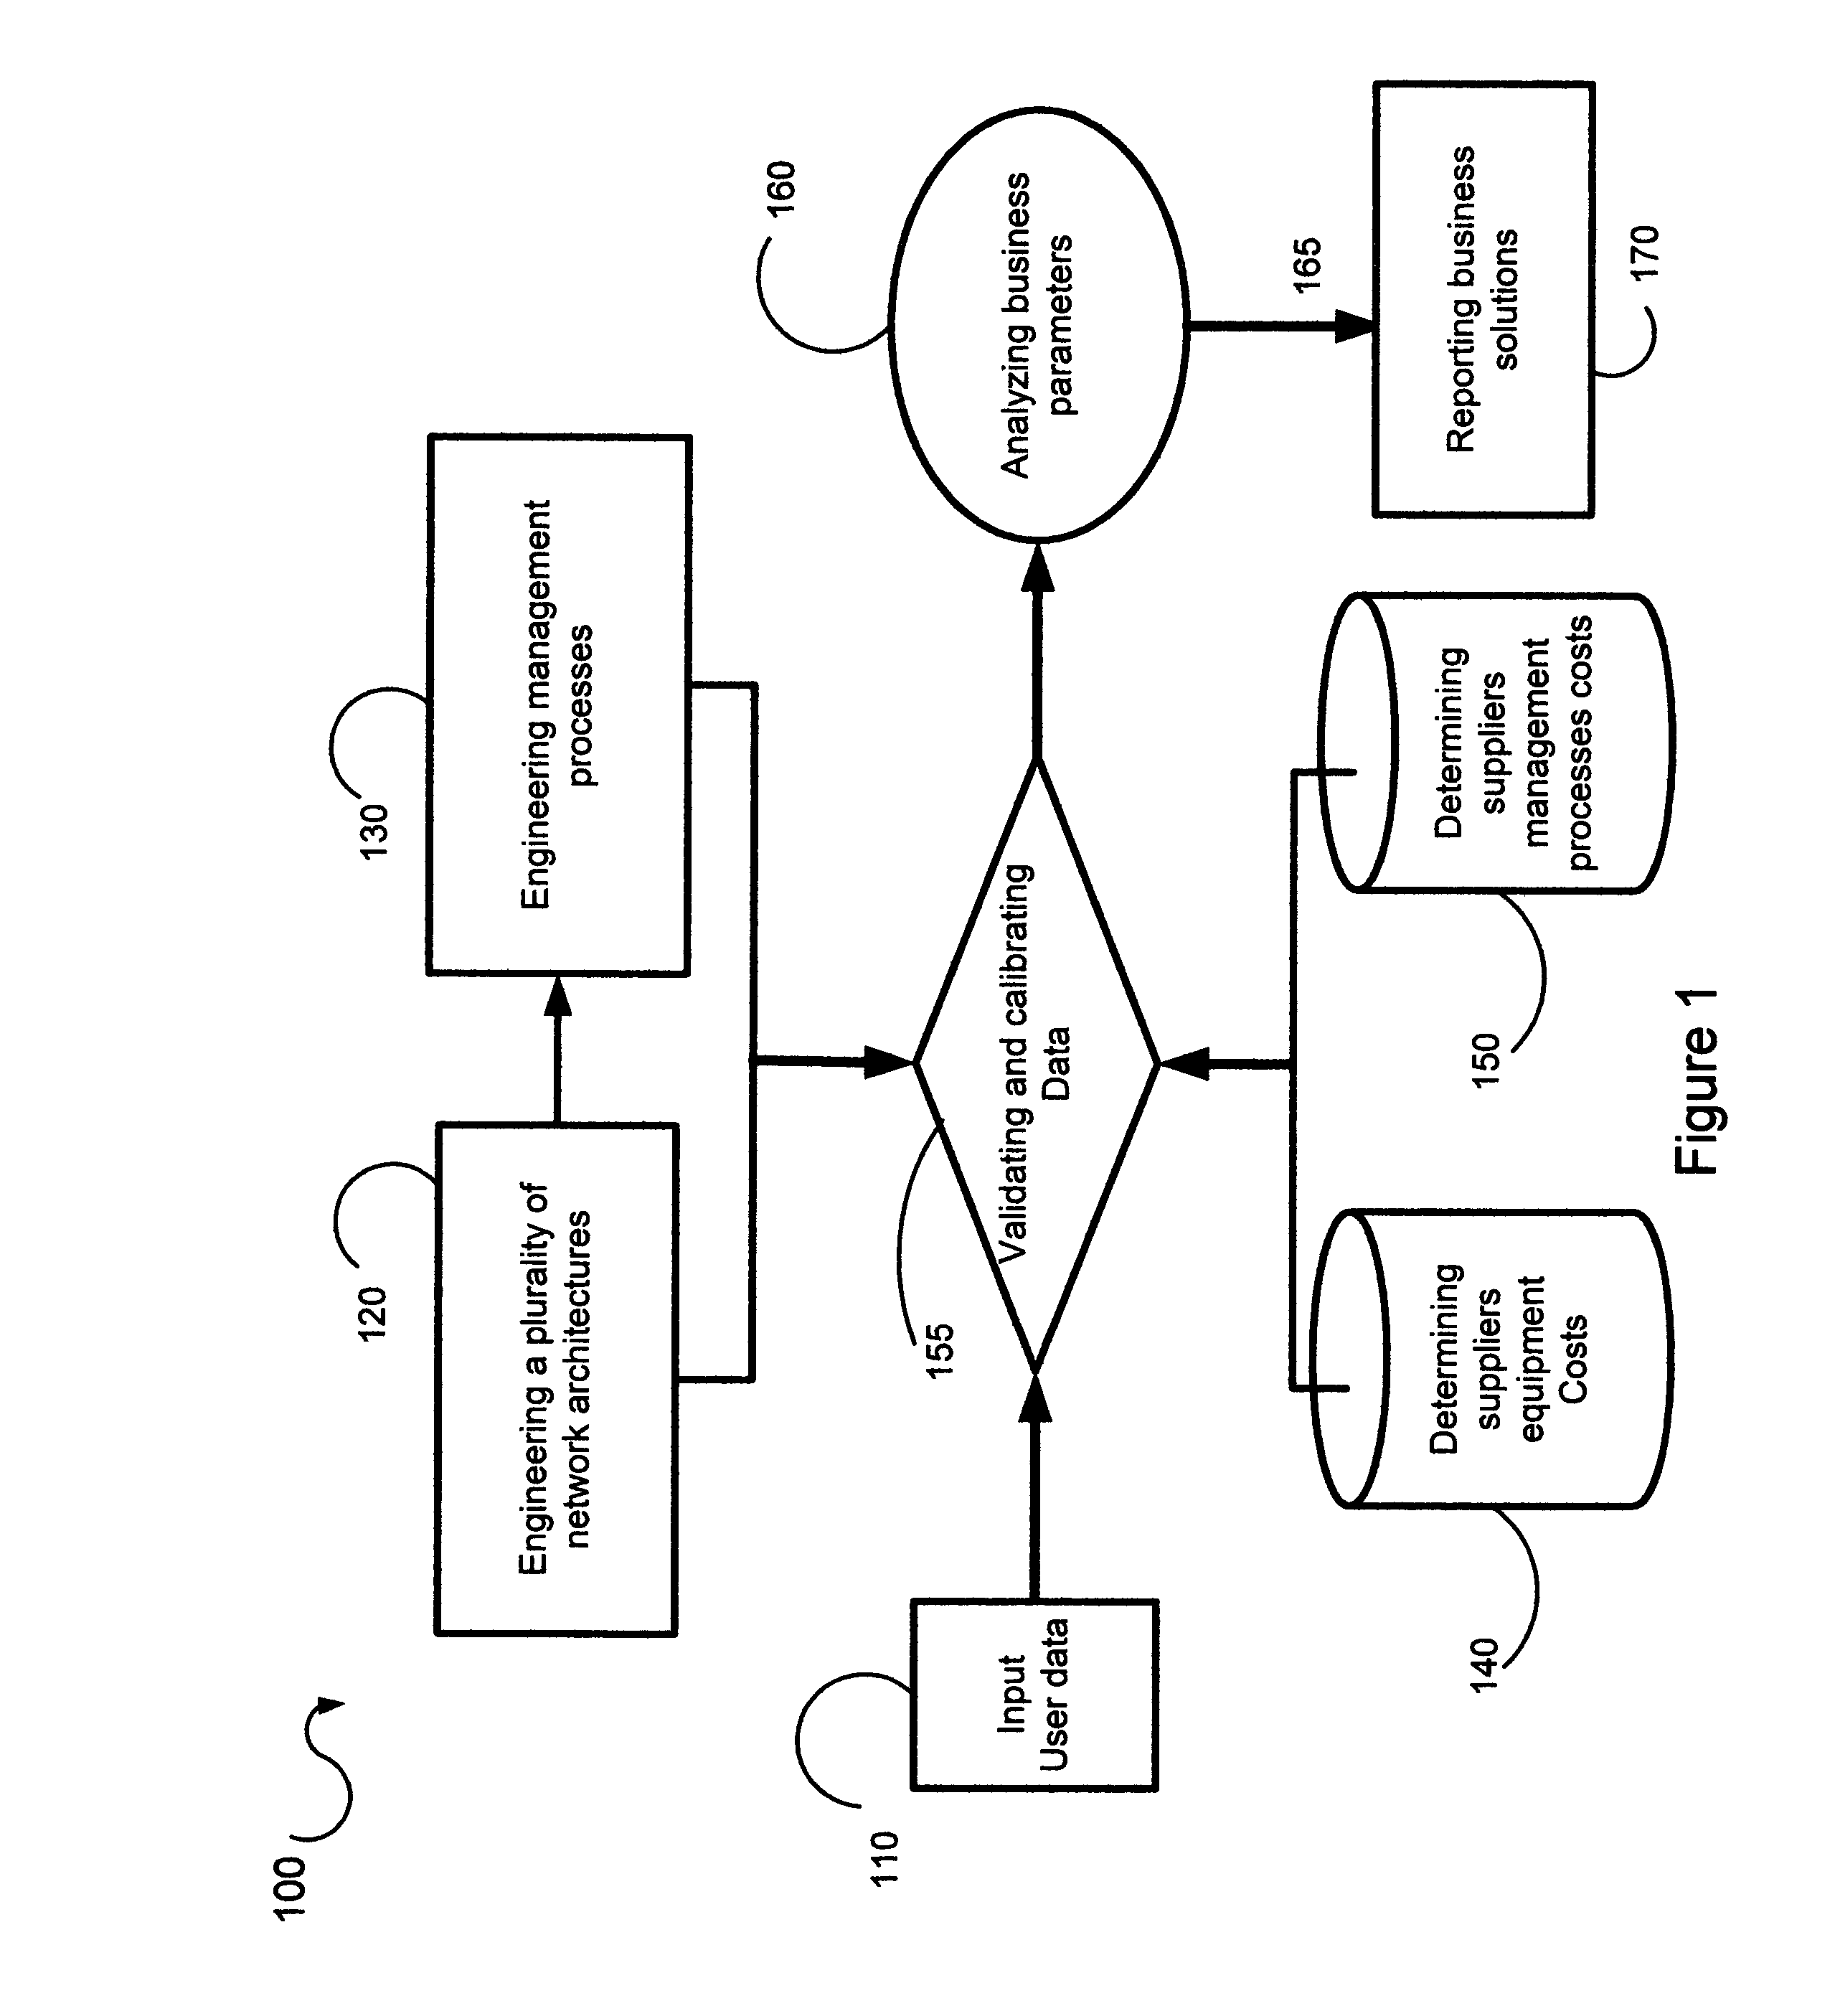 Tool and method for operations, management, capacity, and services business solution for a telecommunications network